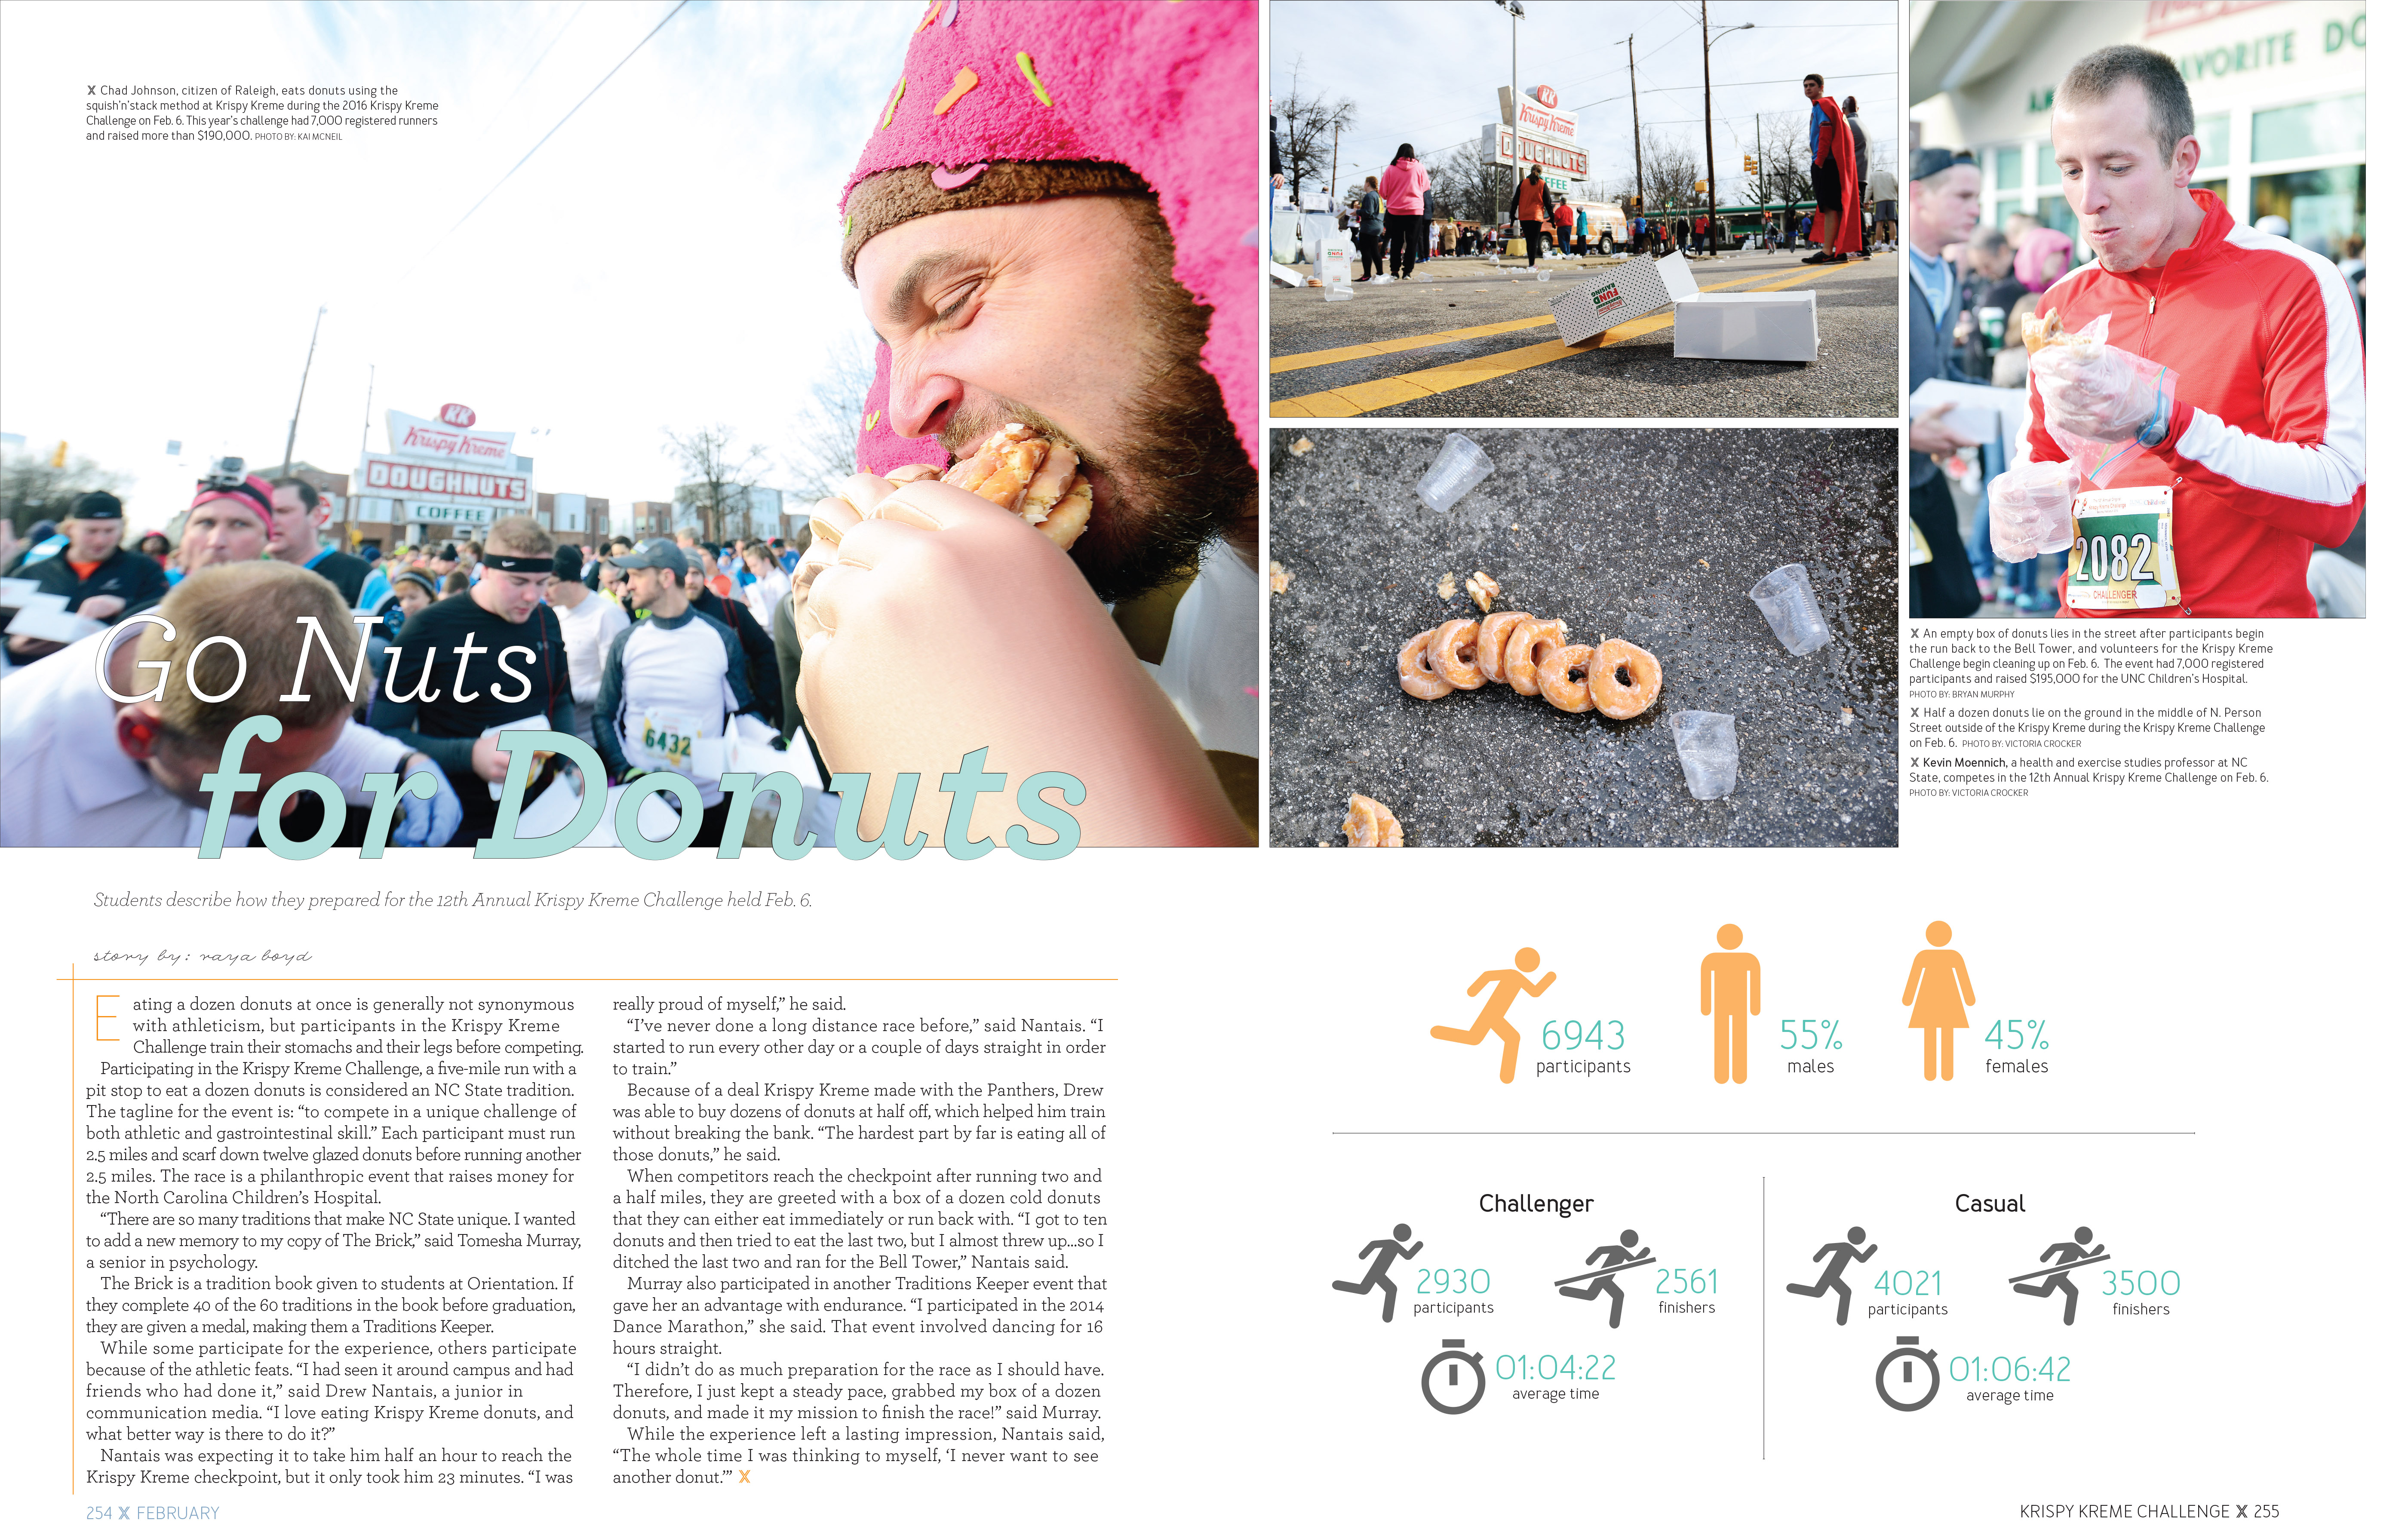 The 2016 Agromeck is up for four College Media Association's Pinnacle awards, including Best Yearbook Sports Page/Spread for this spread on the Krispy Kreme Challenge designed by Erica Holmsen.